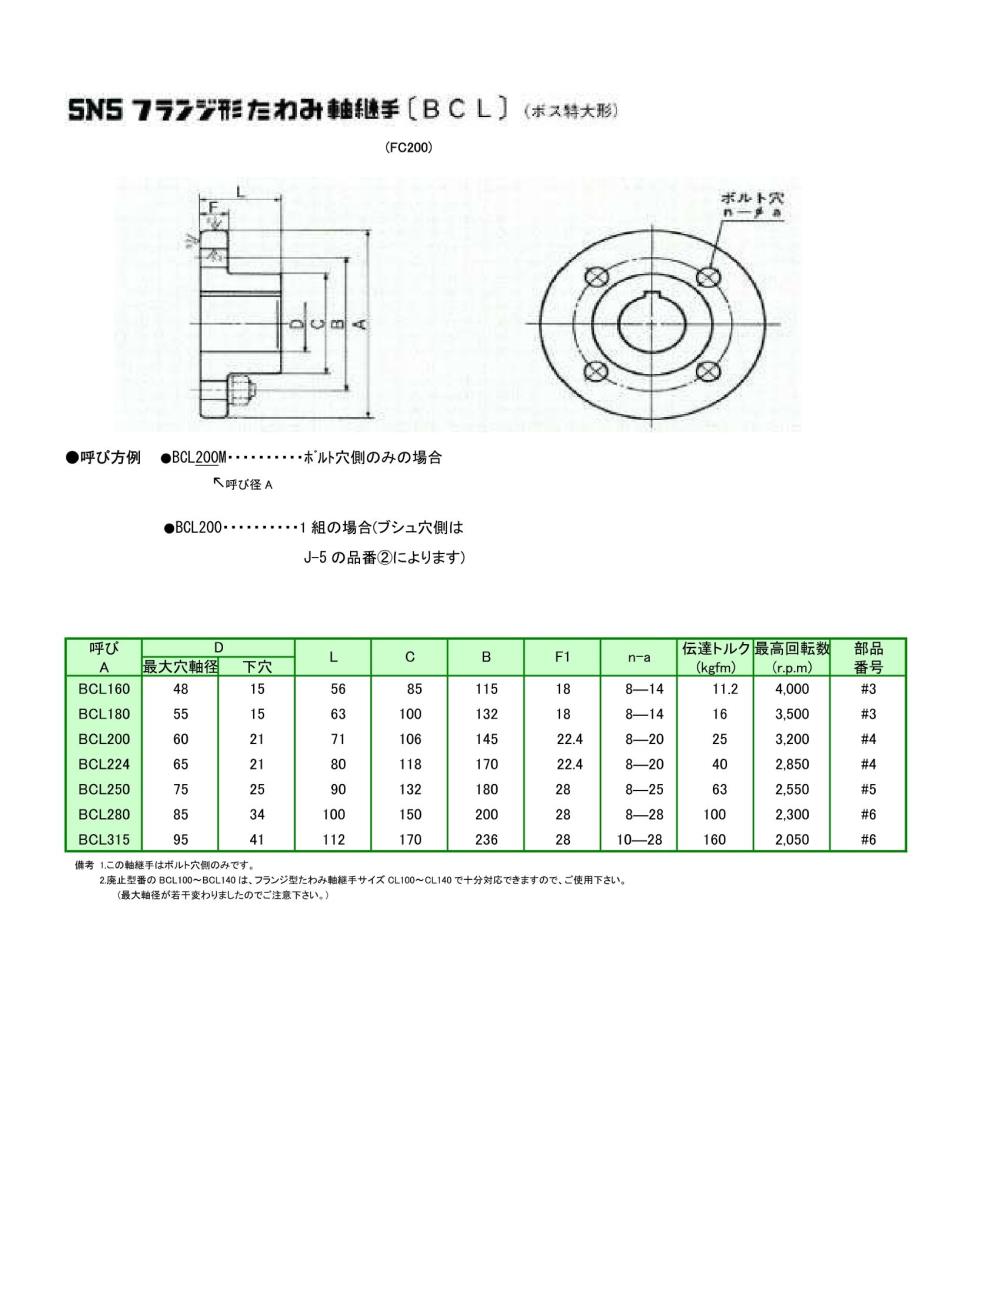 SNS Flexible Shaft Coupling BCL Series,BCL 160, BCL 180, BCL 200, BCL 224, BCL 250, BCL 280, BCL 315, SNS, Flexible Shaft Coupling,SNS,Machinery and Process Equipment/Machine Parts